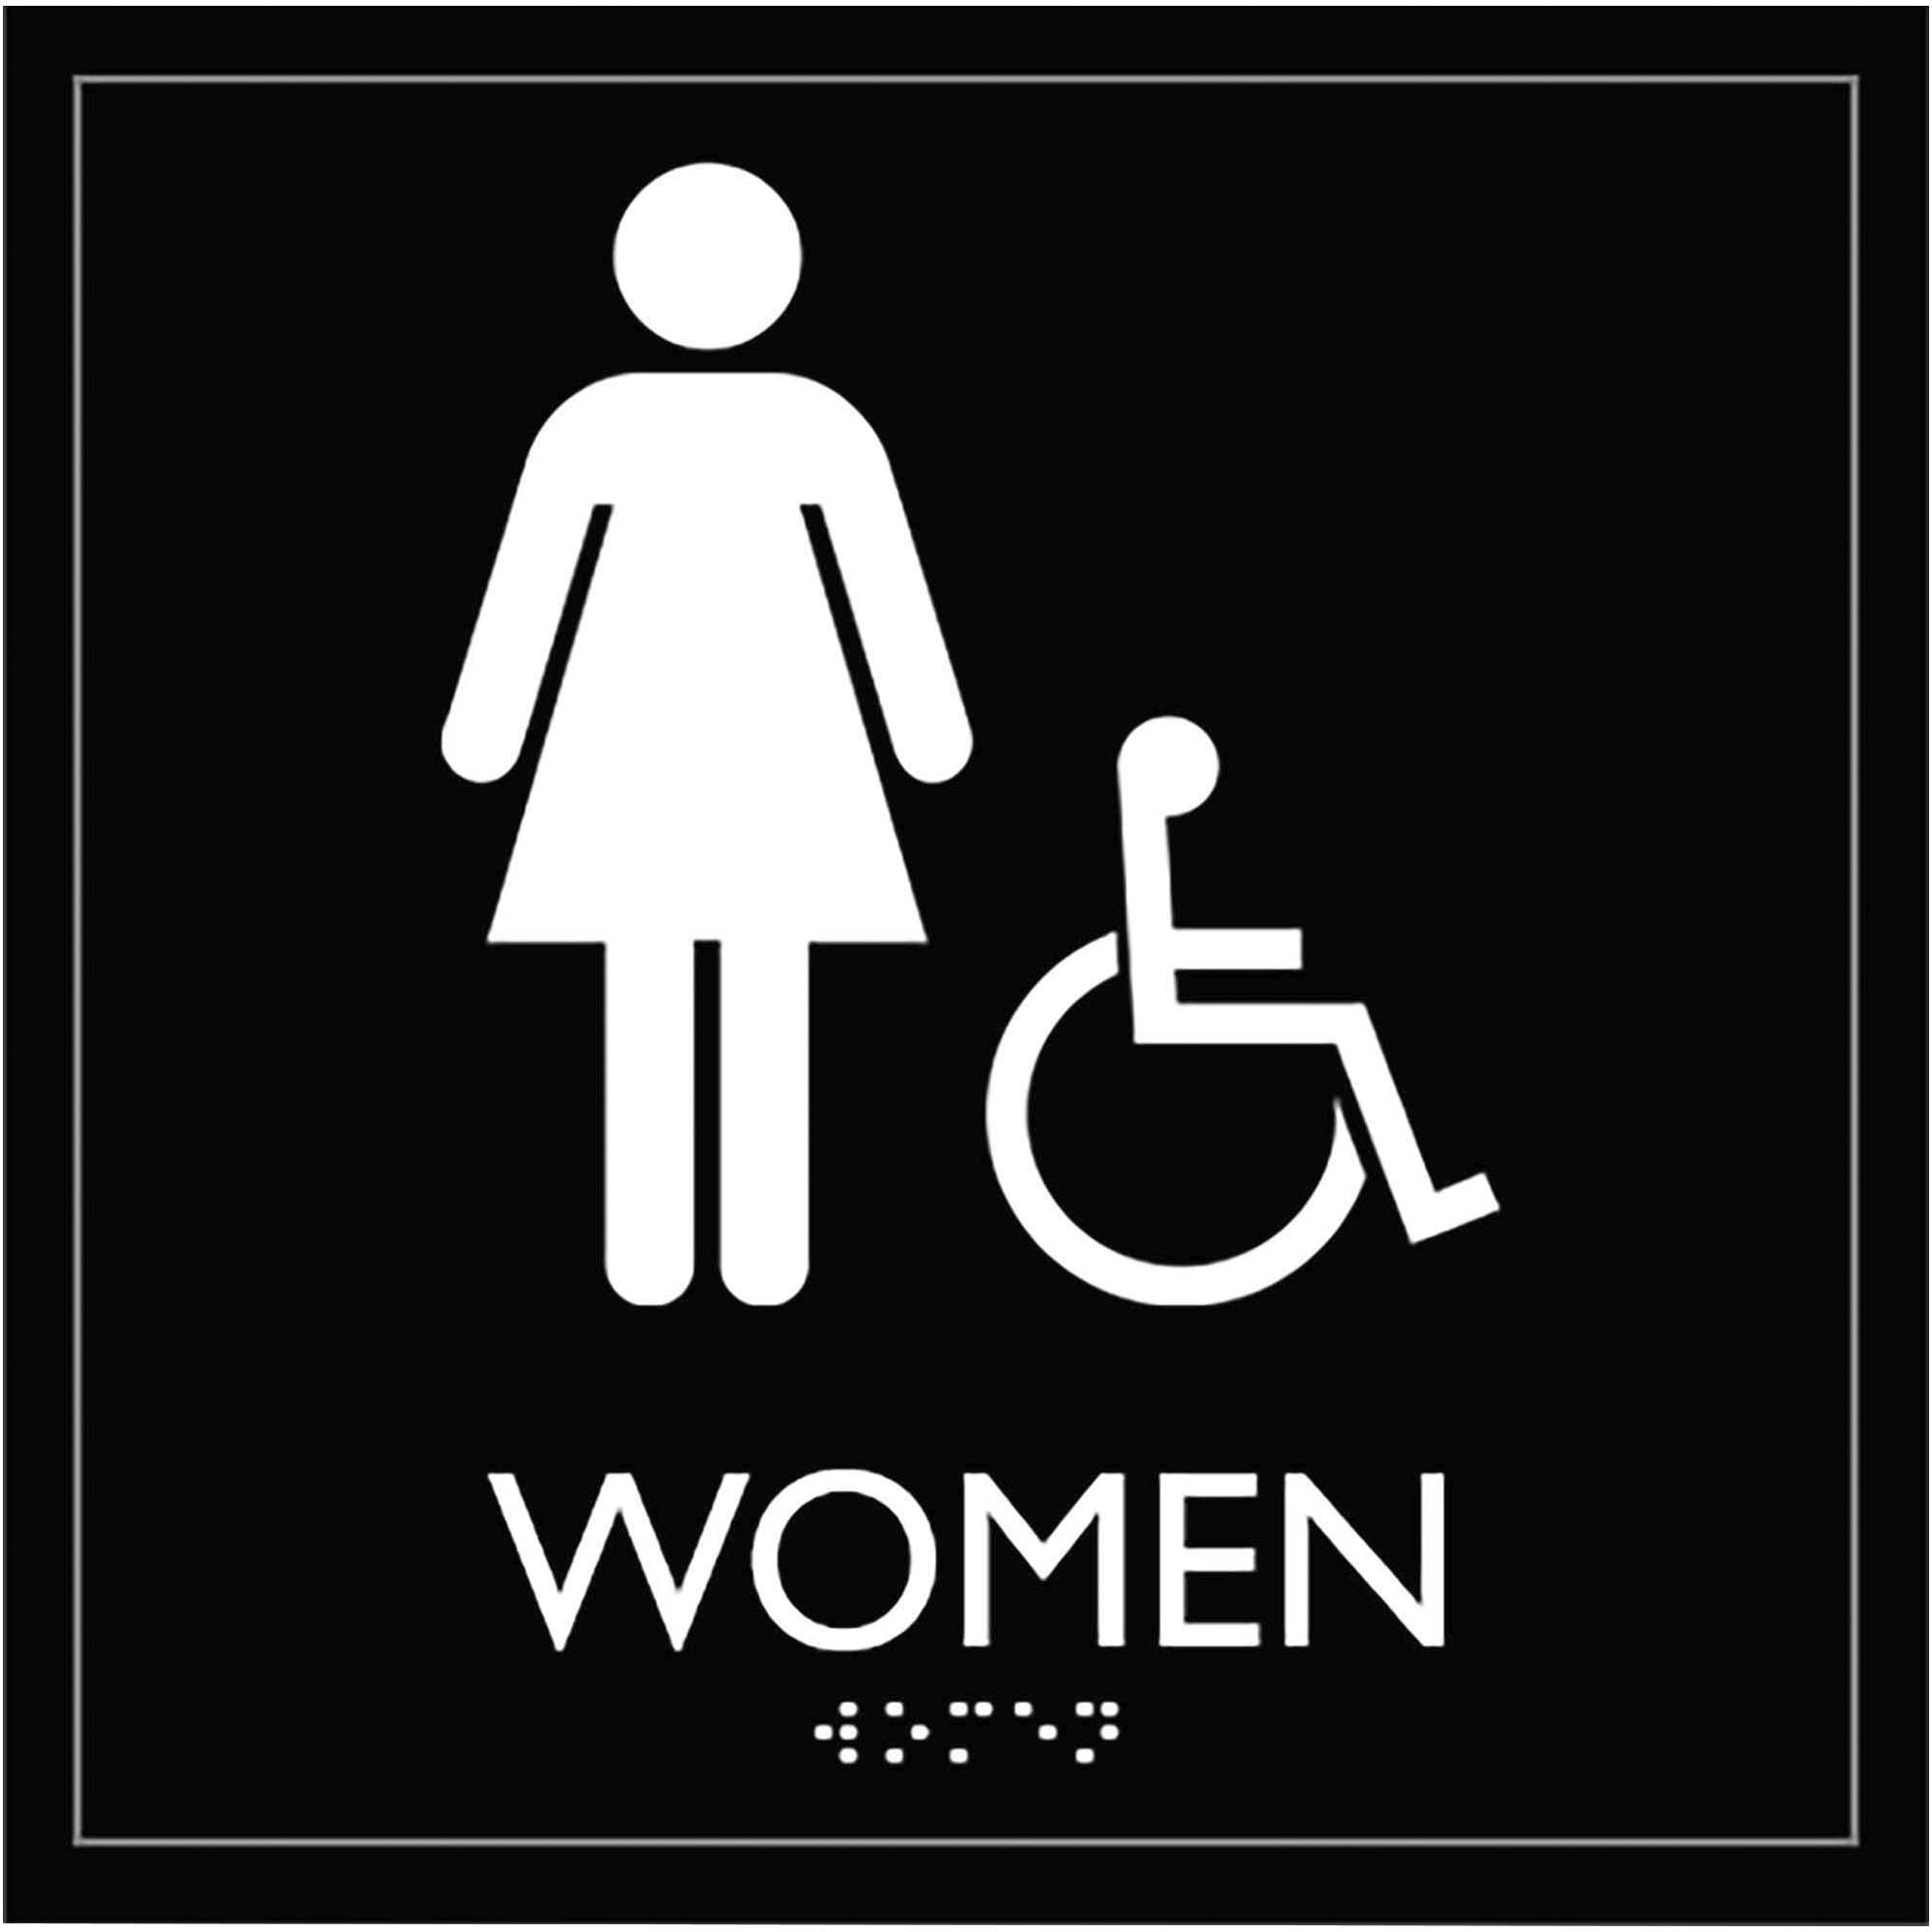 lorell-womens-handicap-restroom-sign-1-each-women-print-message-8-width-x-8-height-square-shape-easy-readability-injection-molded-plastic-black-black_llr02657 - 1